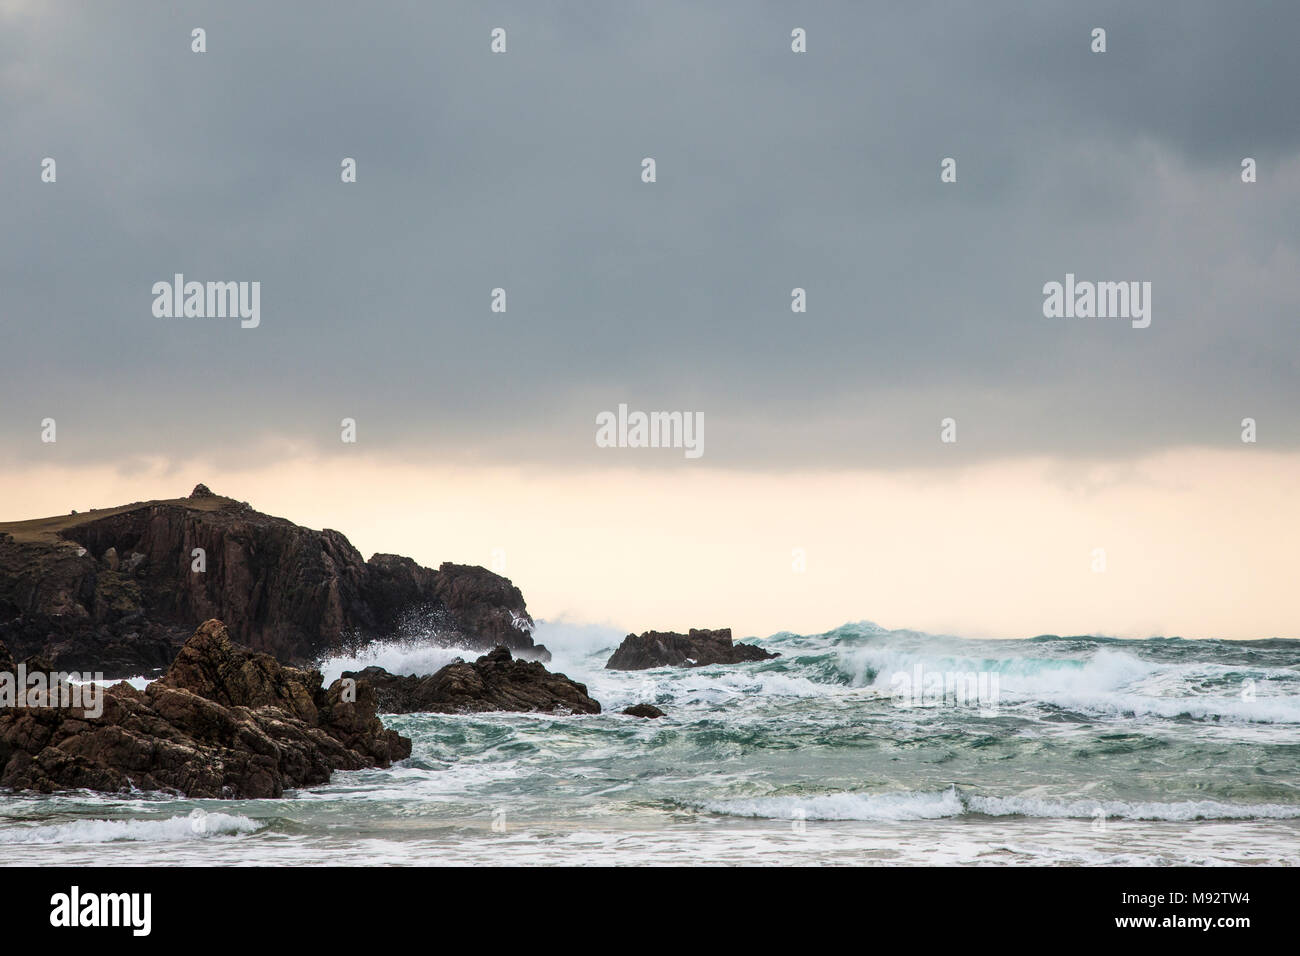 Atlantic waves at Mangursta beach on the Isle of Lewis in the Outer Hebrides. Stock Photo